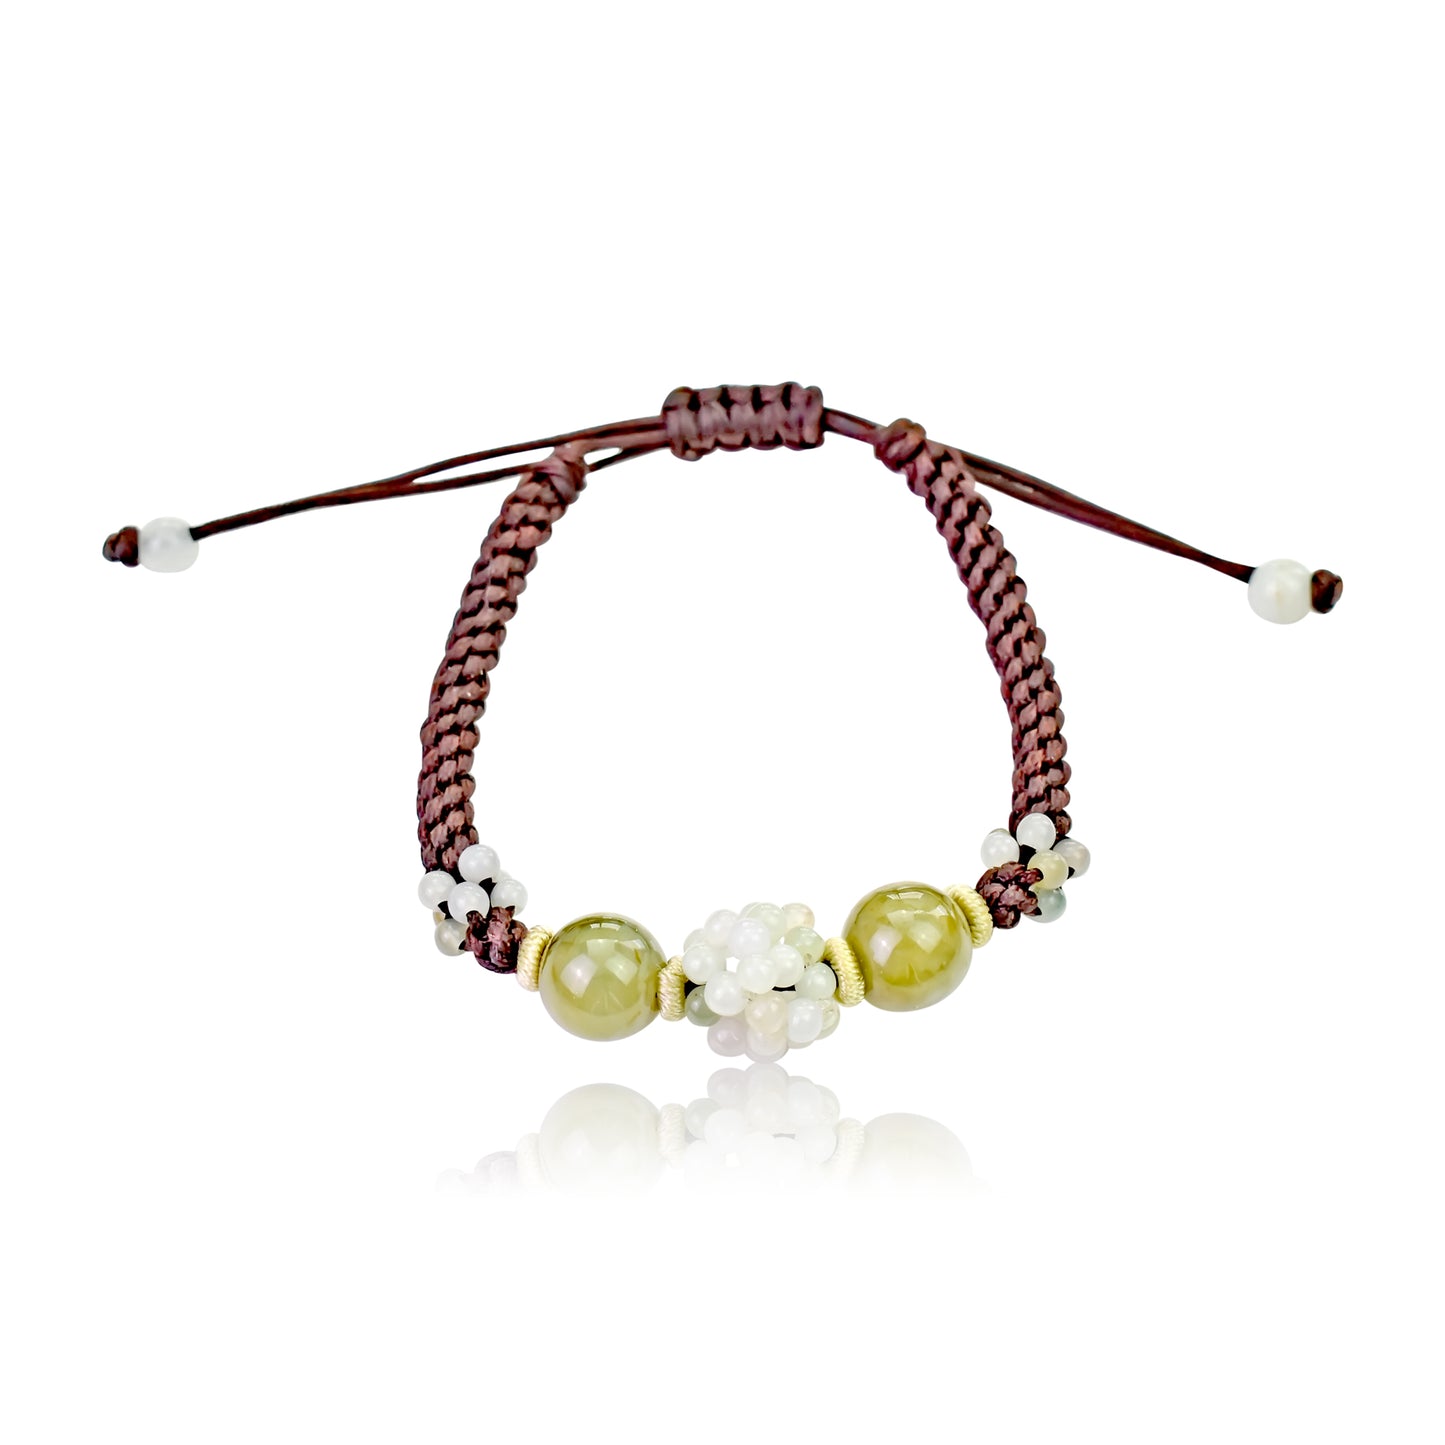 Beaded Charm Jade Bracelet: A Perfect Accessory for Any Outfit